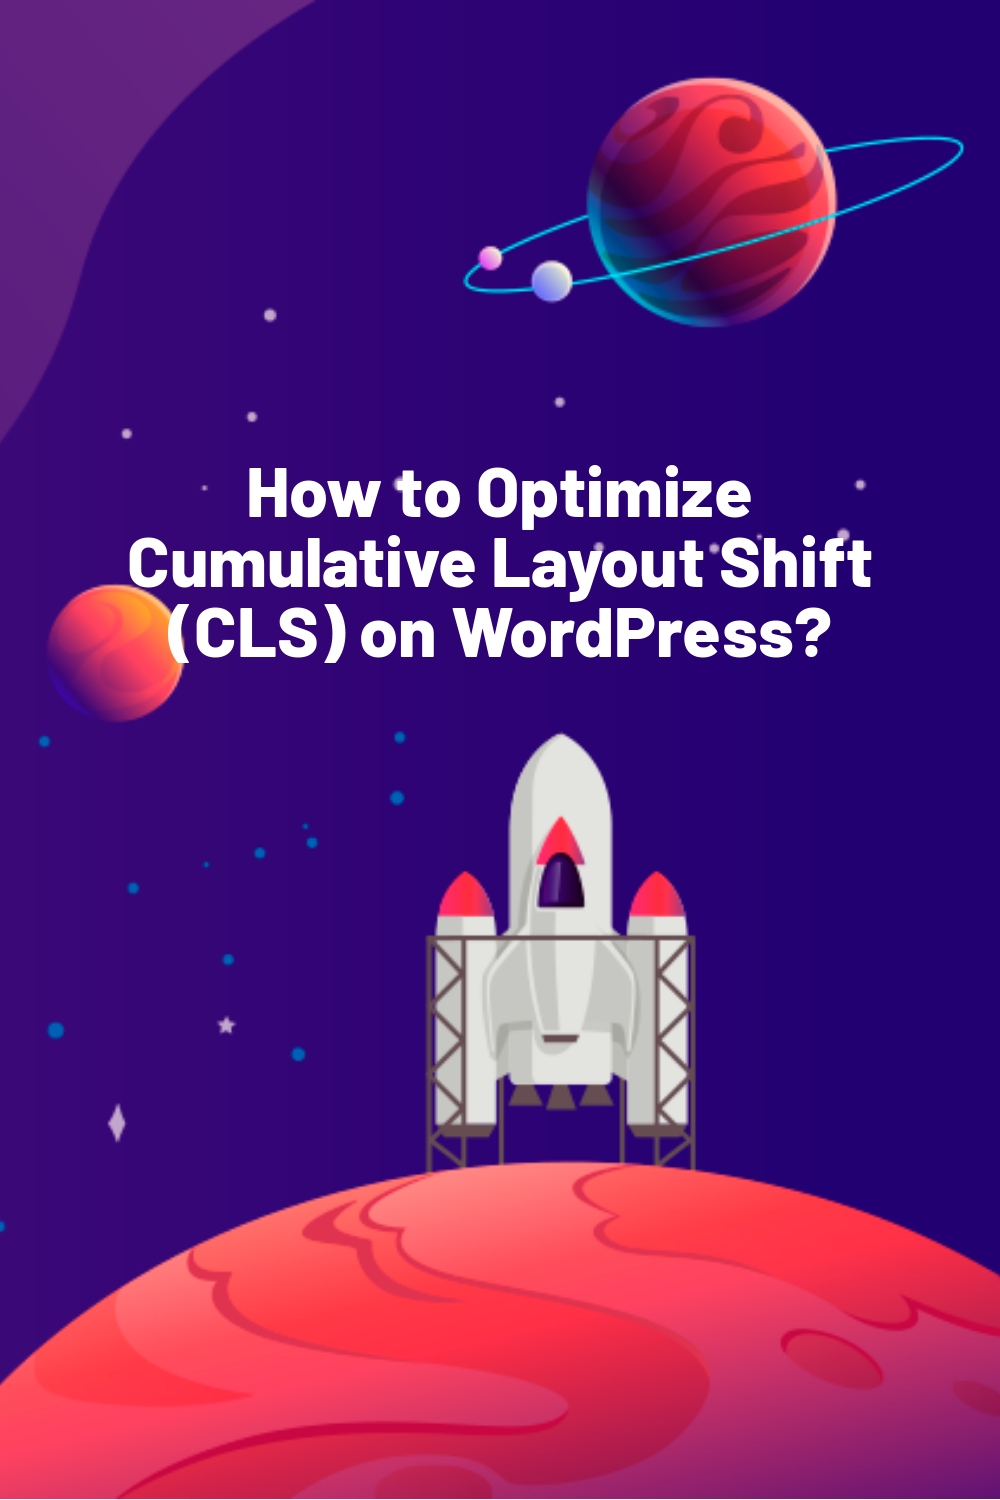 How to Optimize Cumulative Layout Shift (CLS) on WordPress?